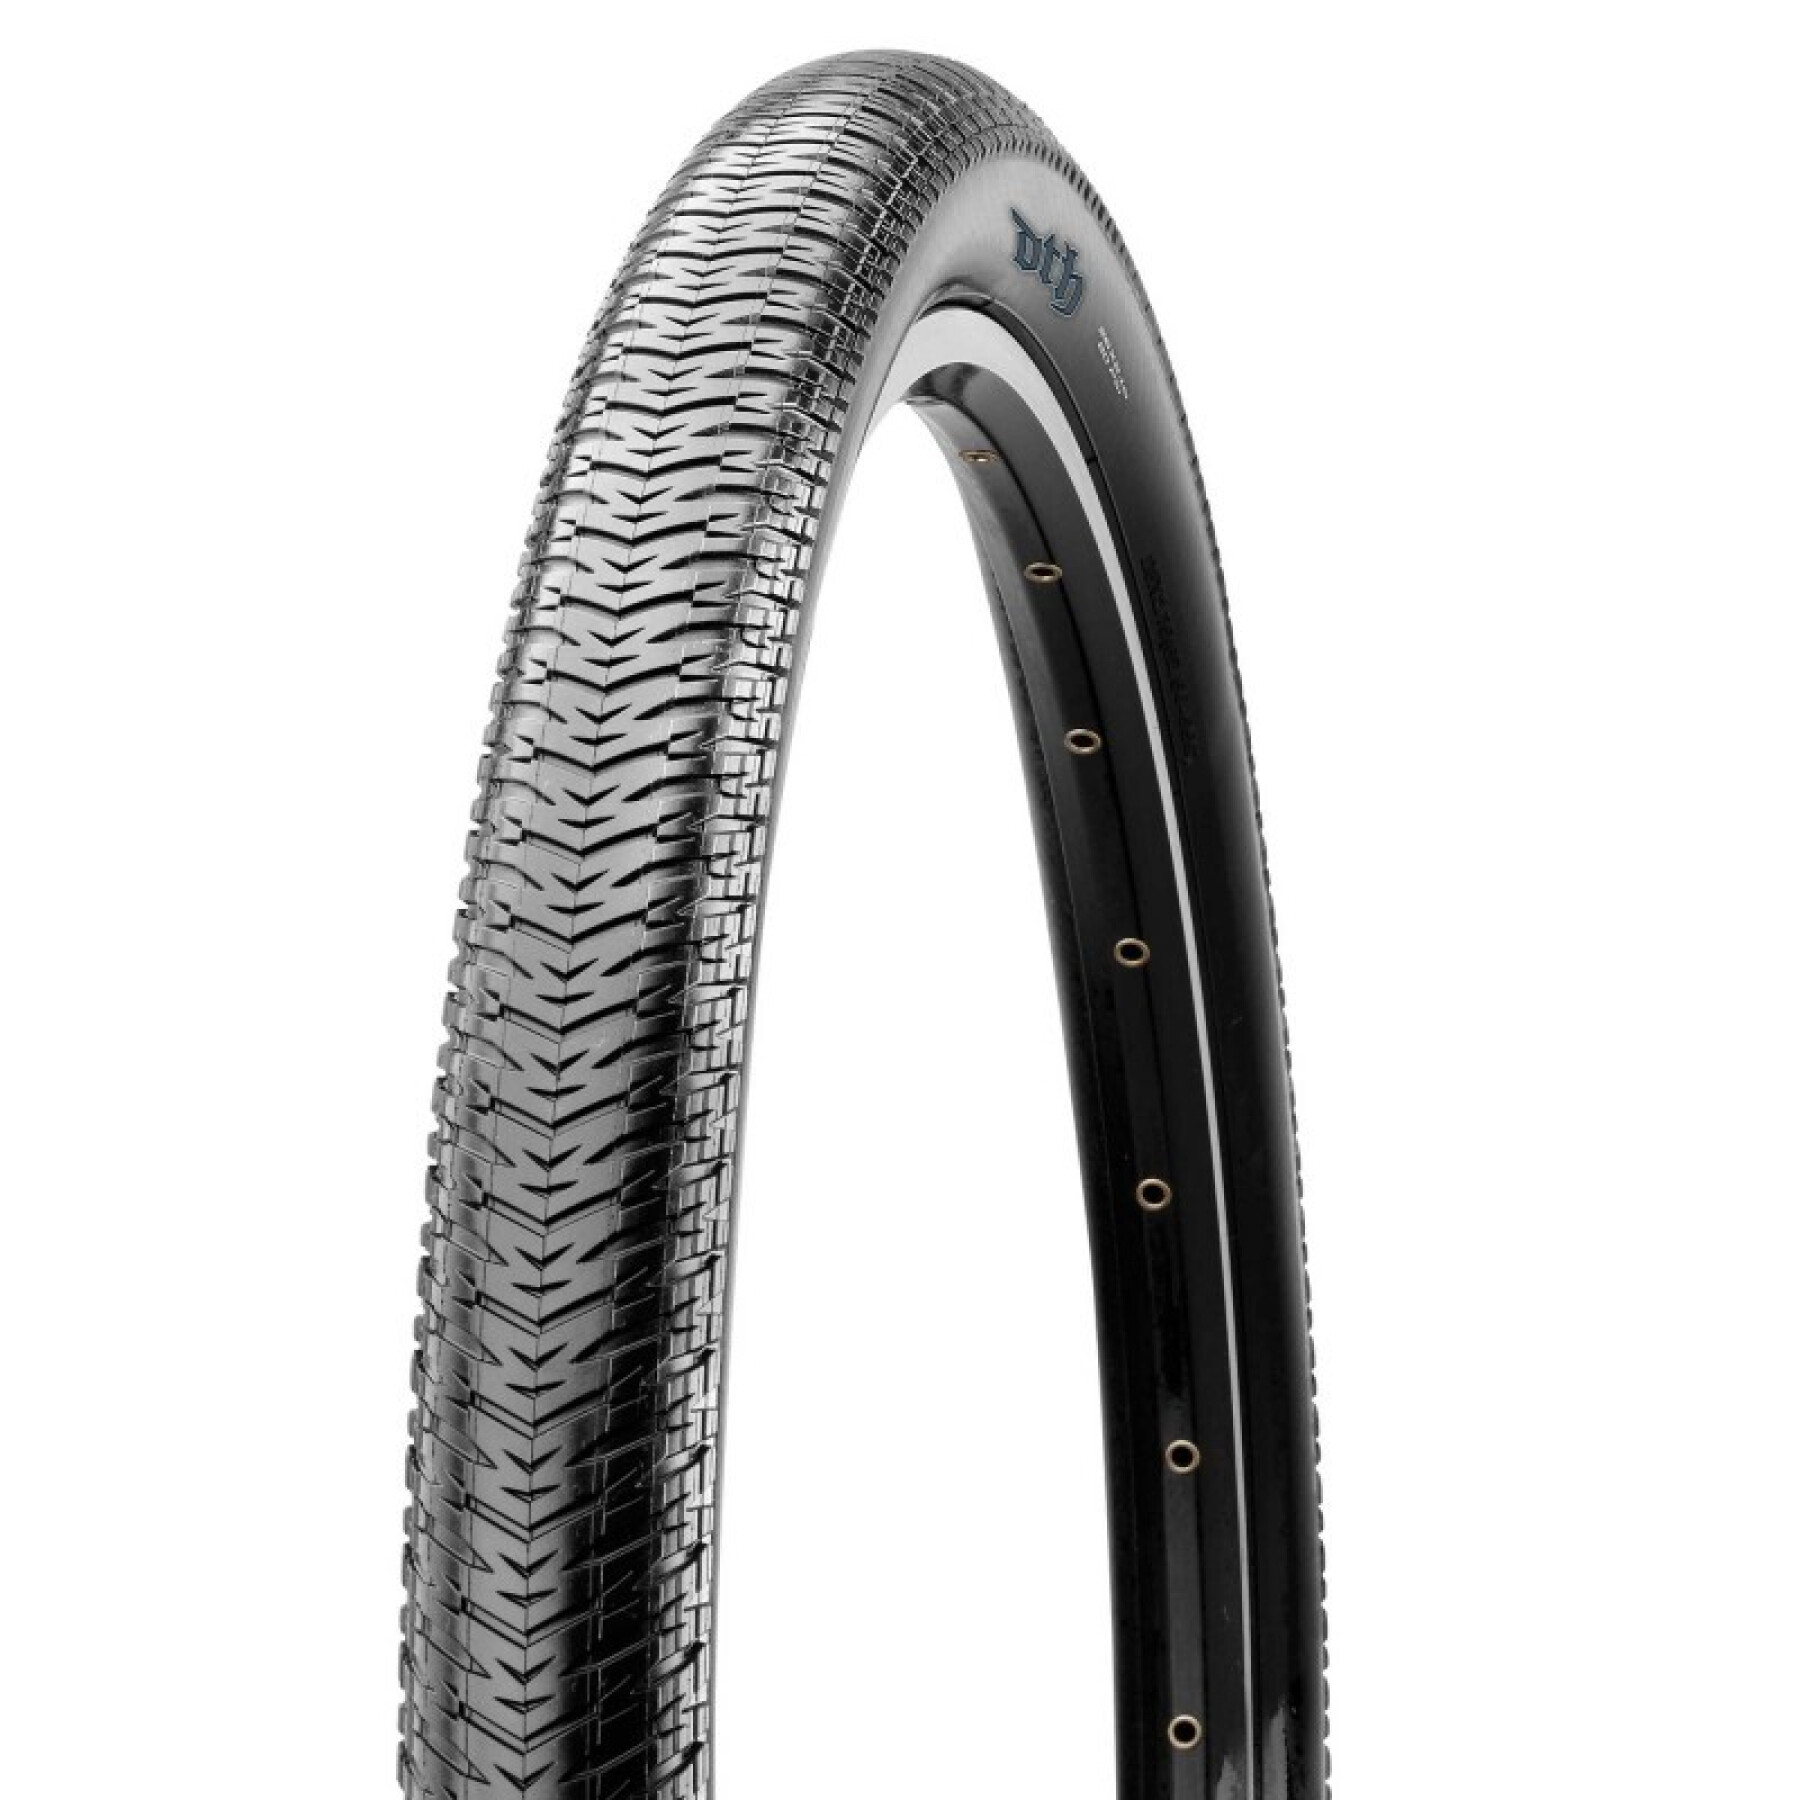 Soft tire Maxxis DTH Exo